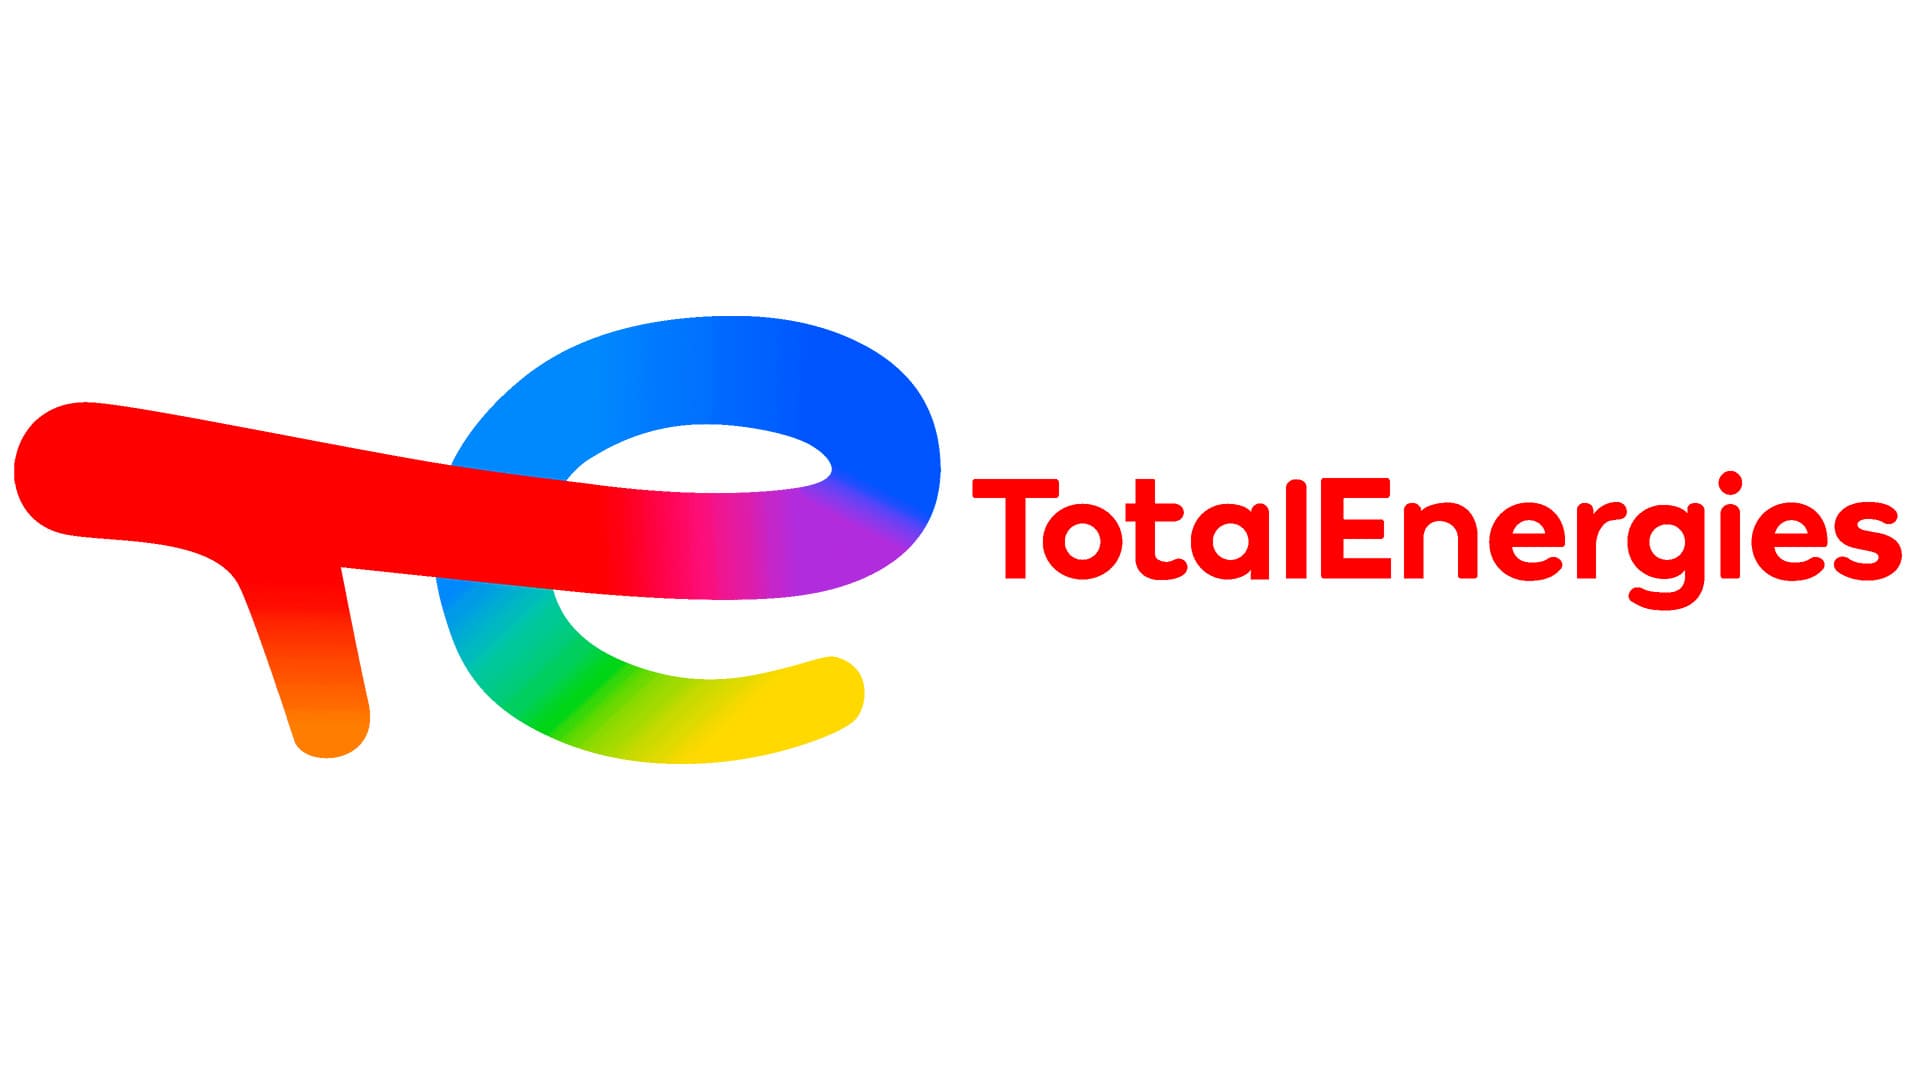 TOTAL ENERGIE RENOUVELABLE